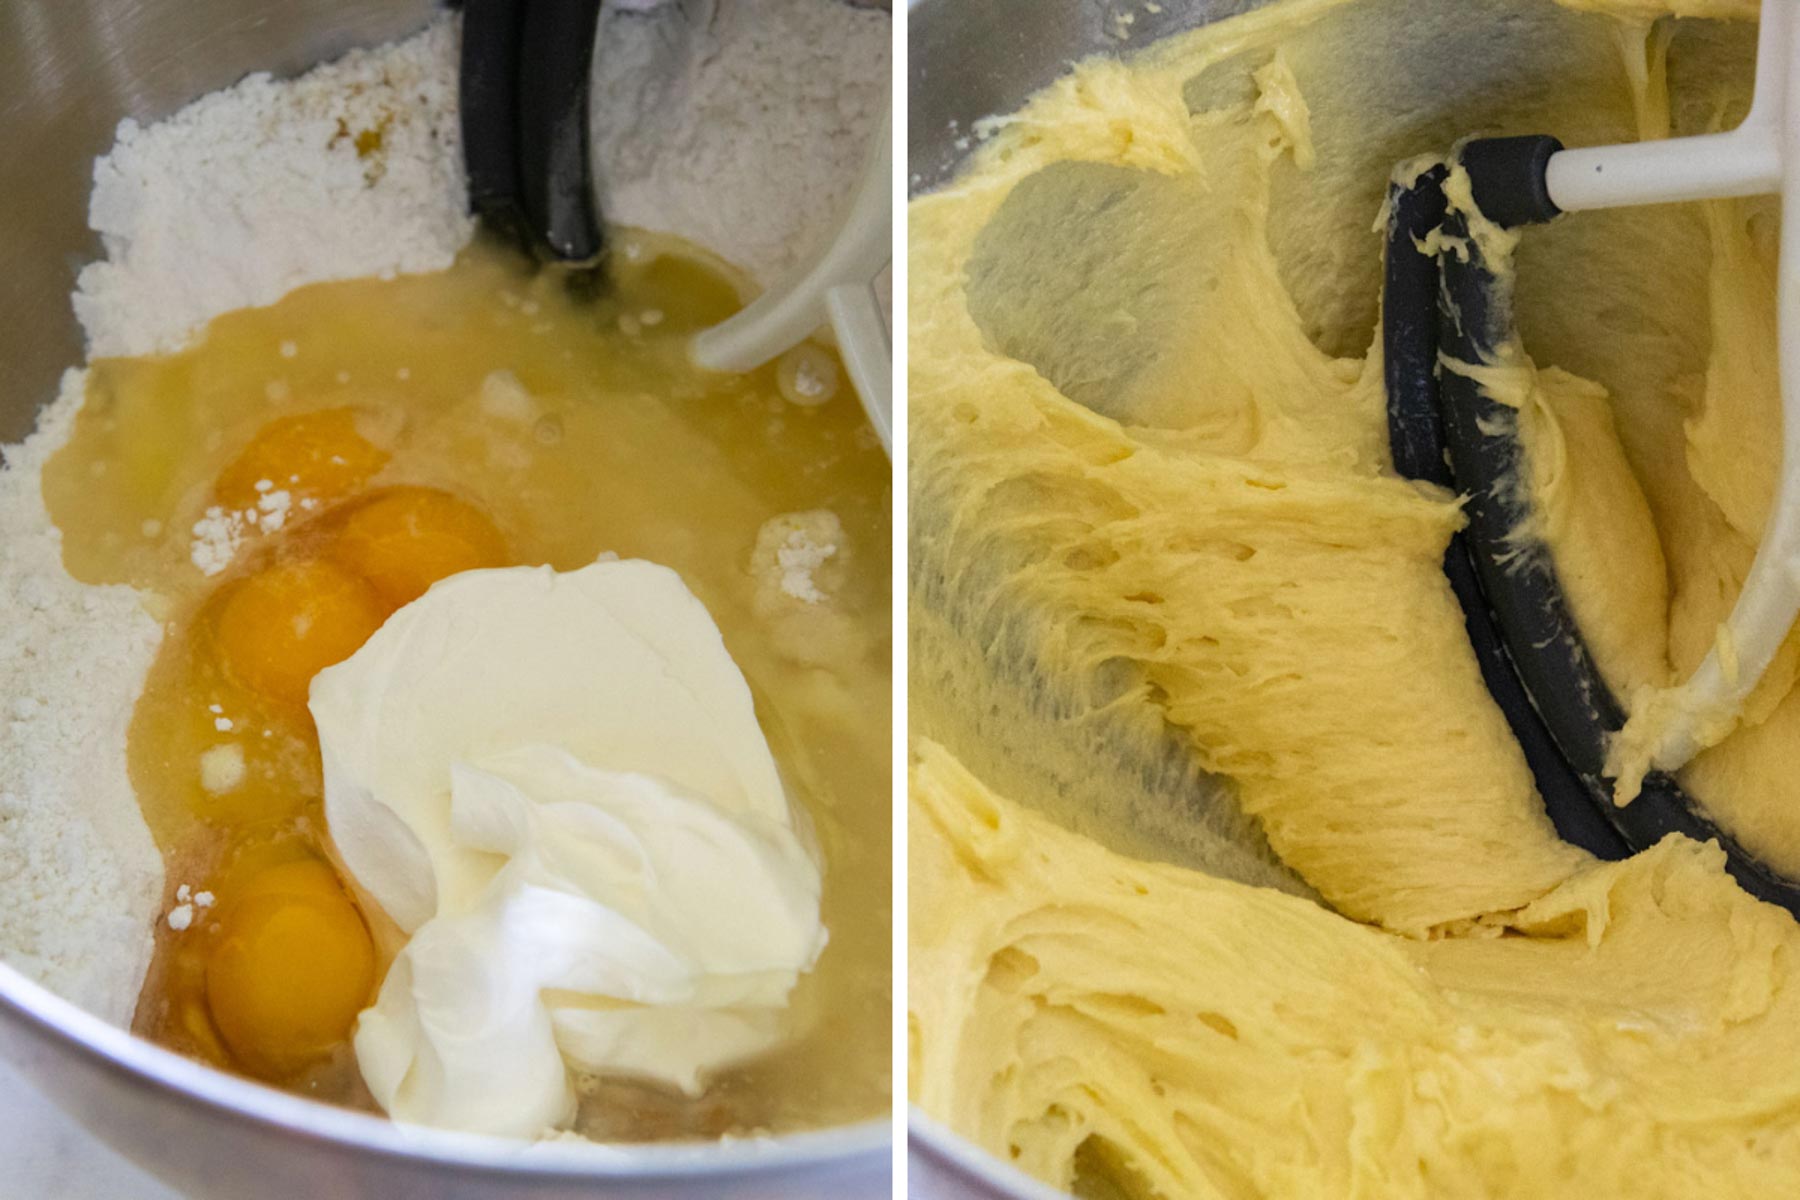 images showing how to make the lemon cake